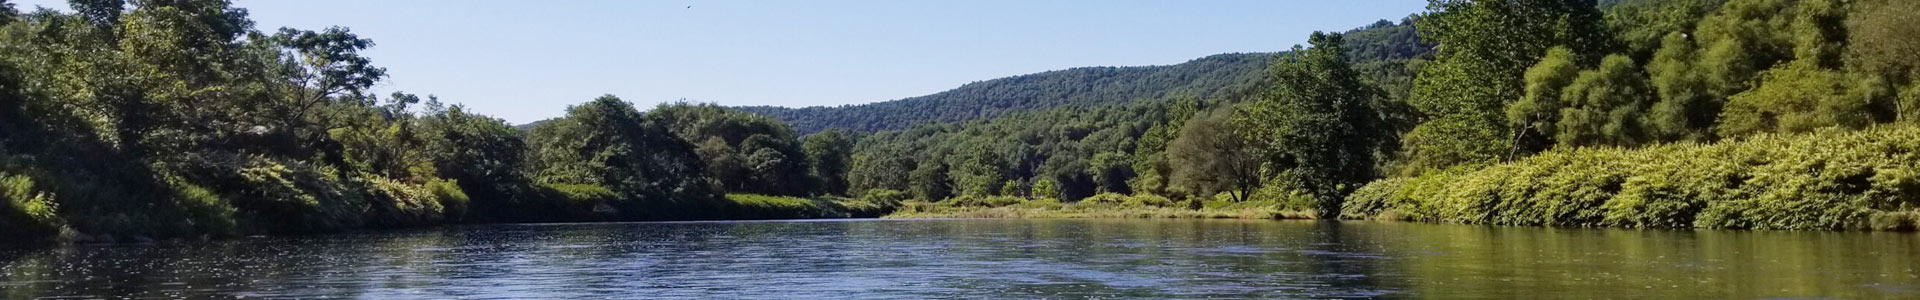 view of the Delaware River in summer